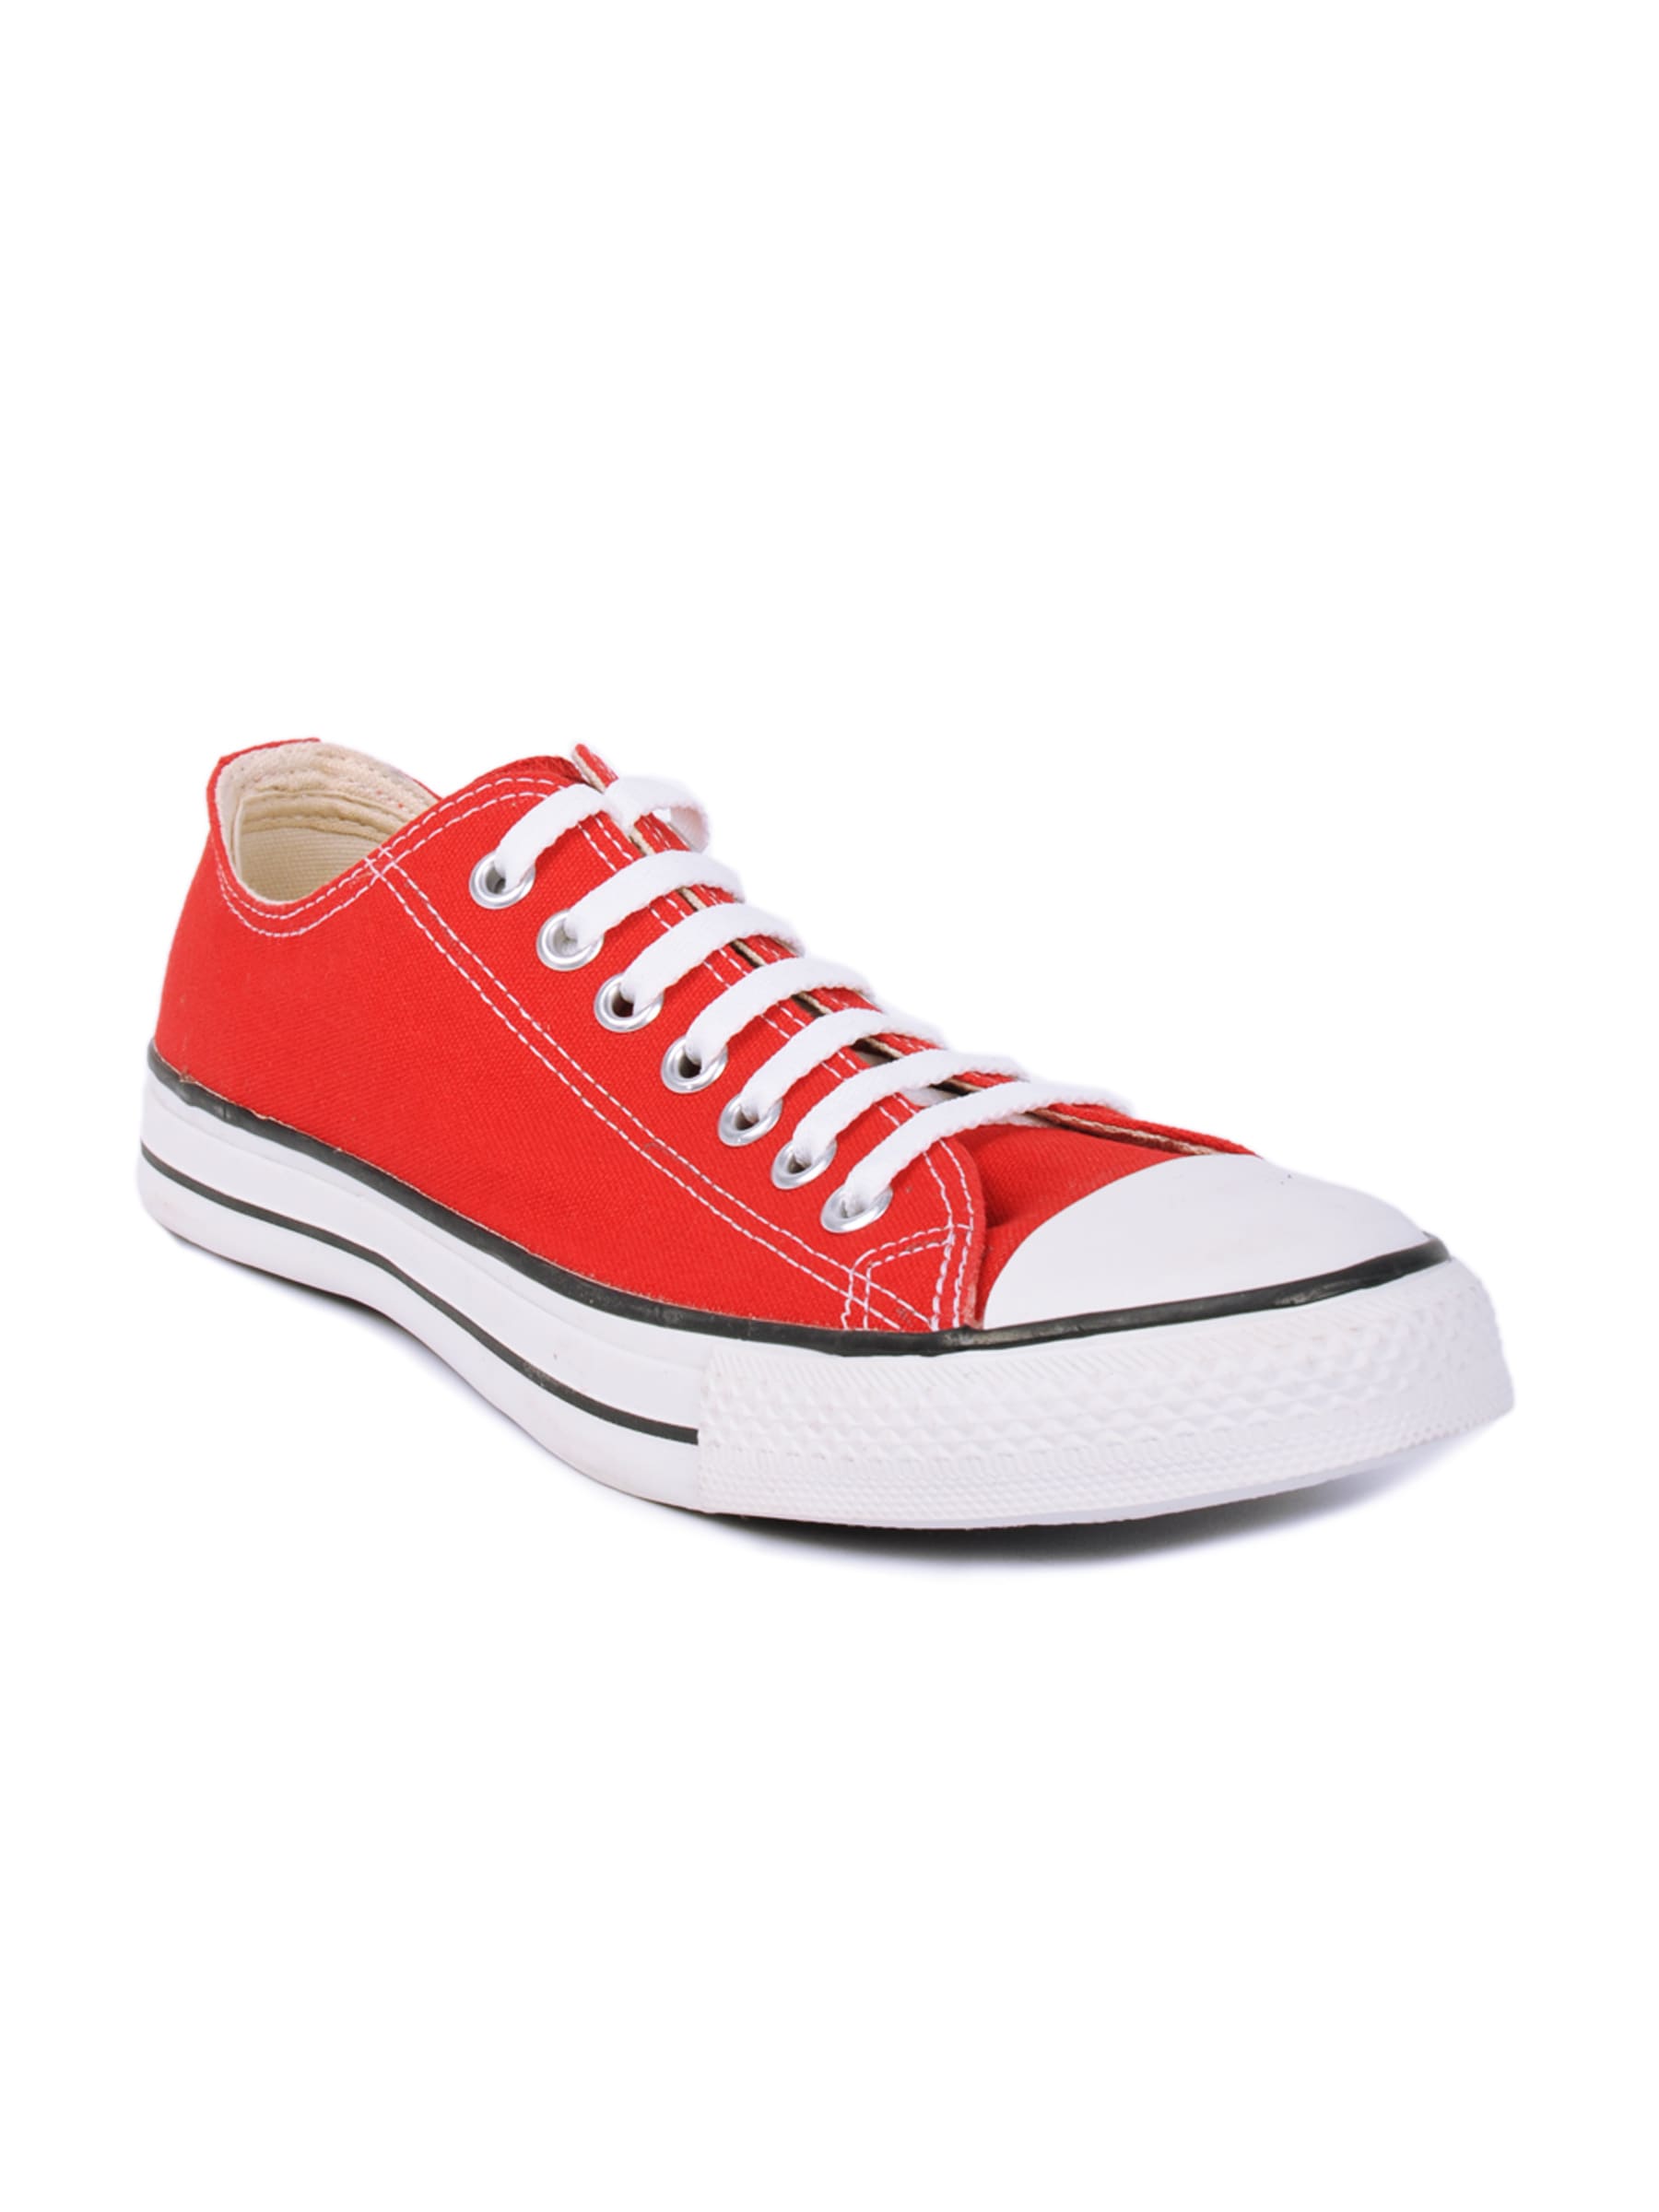 Converse Unisex All Star Canvas Ox Red Shoe